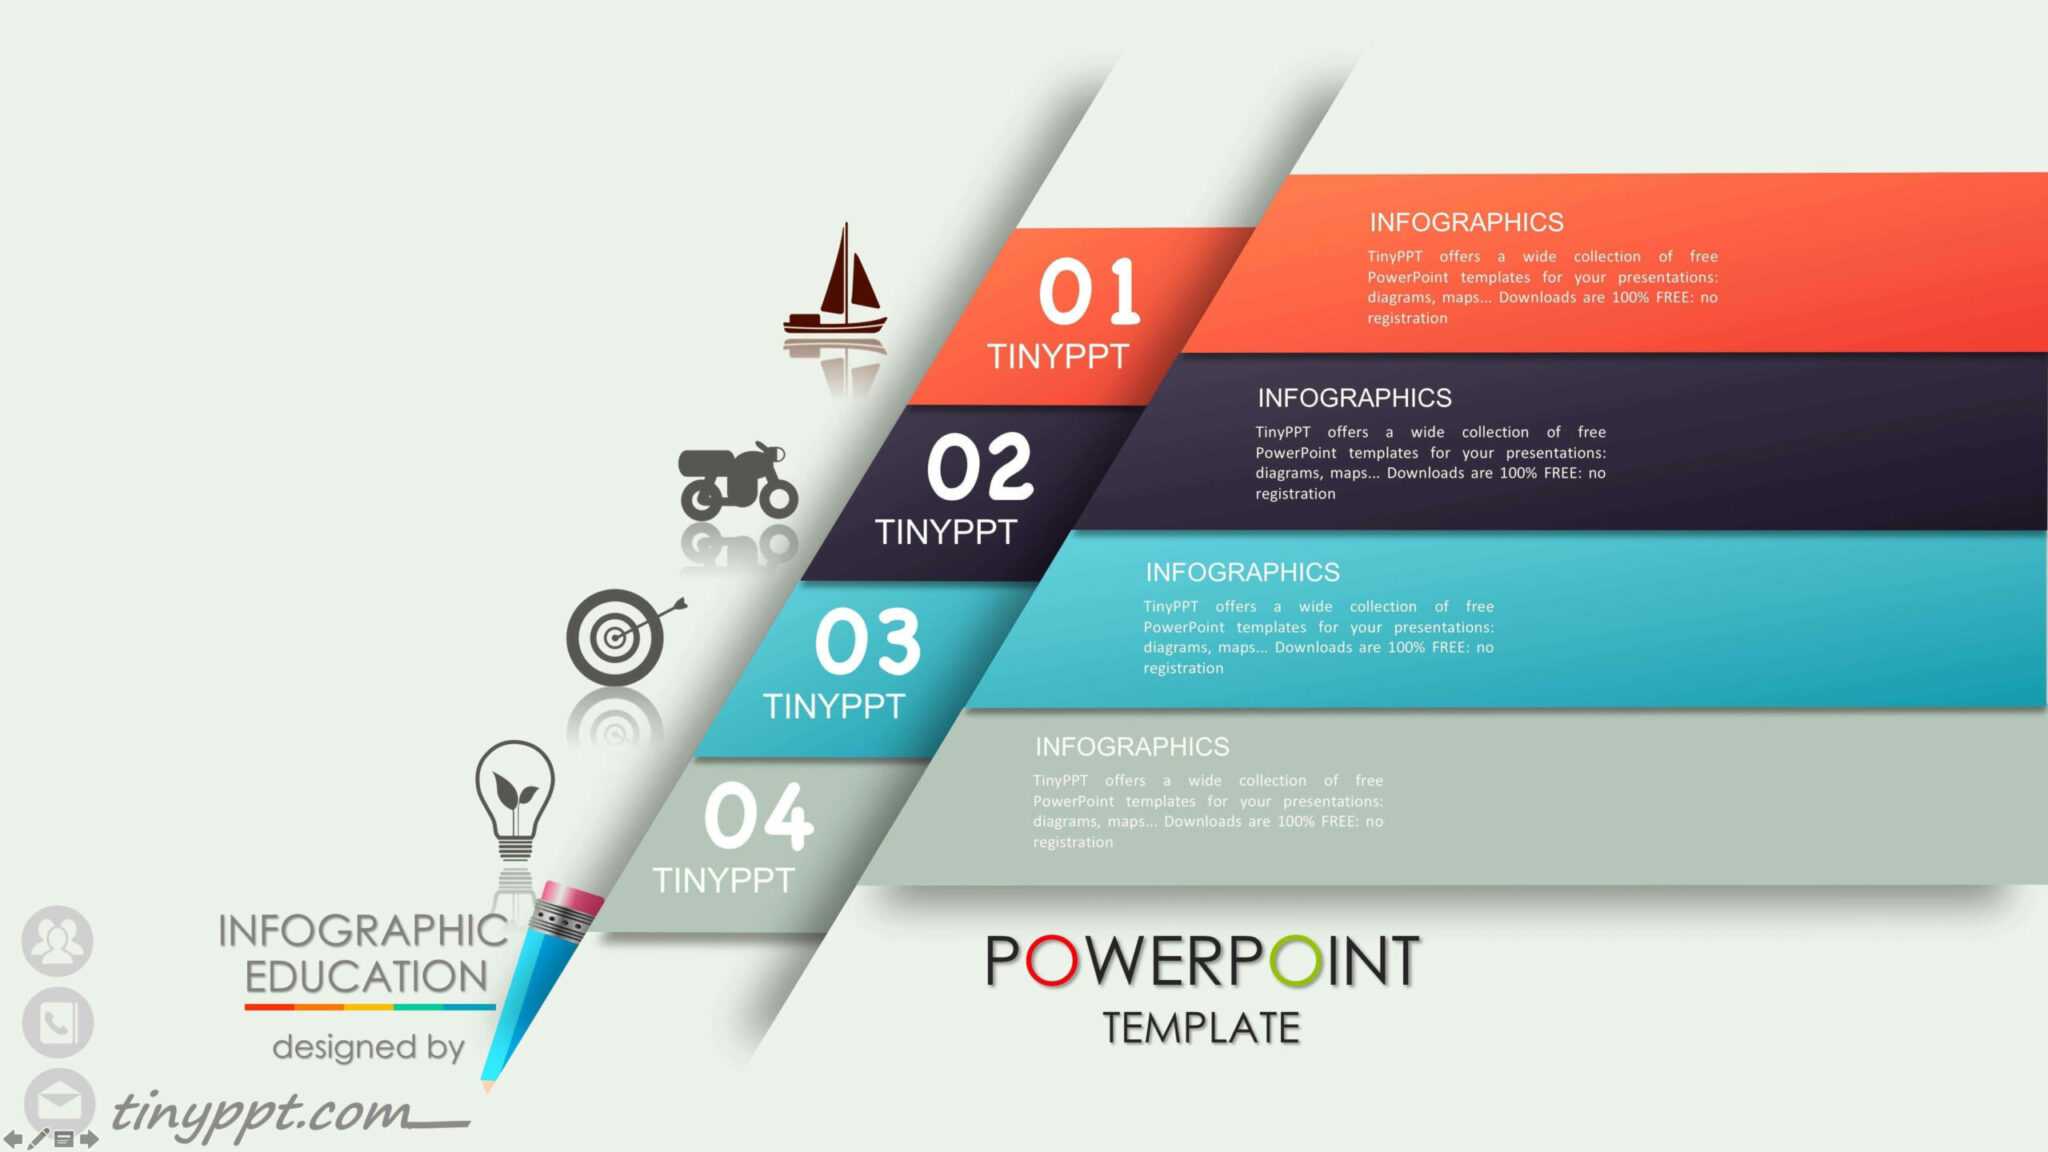  How To Change A Powerpoint Template Dalep midnightpig co Within 